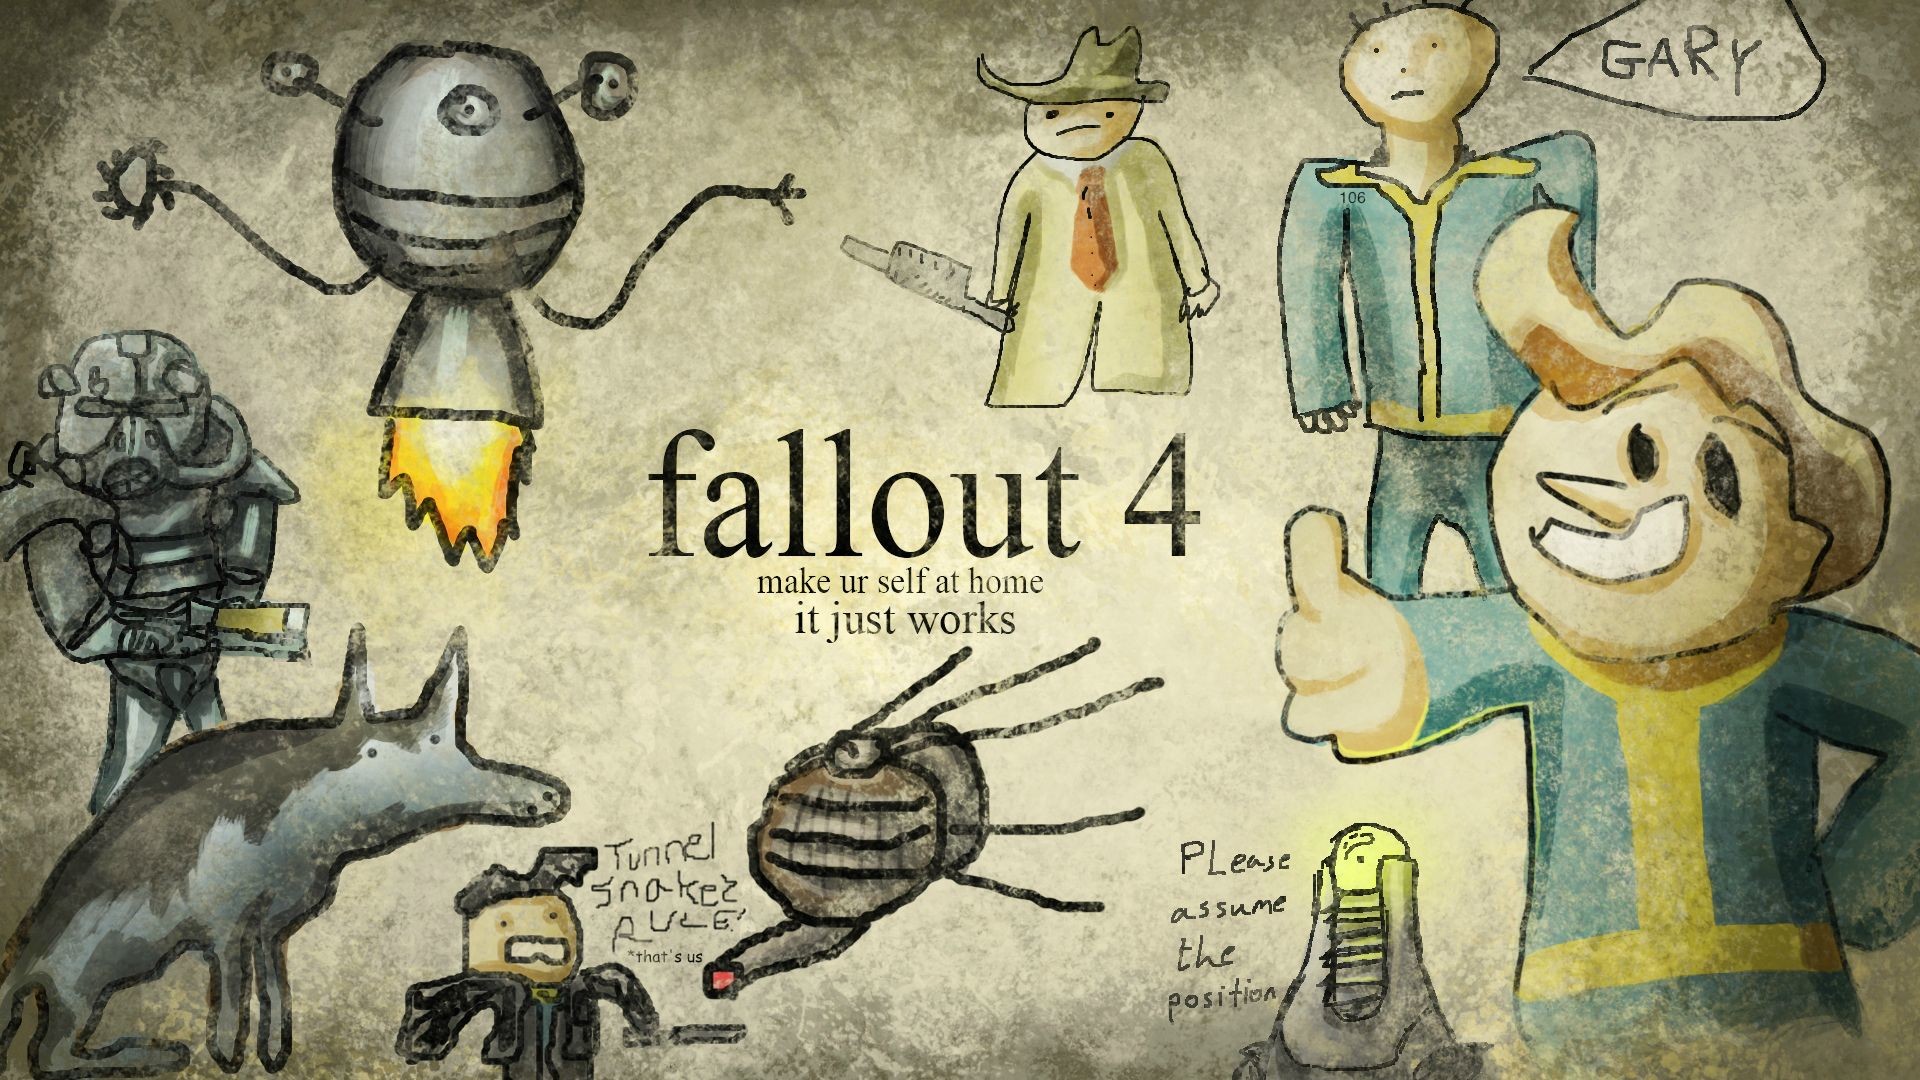 1920x1080 Fallout 4 Image For Desktop Wallpaper 1920 x 1080 px 623.08 KB   pipboy please standby